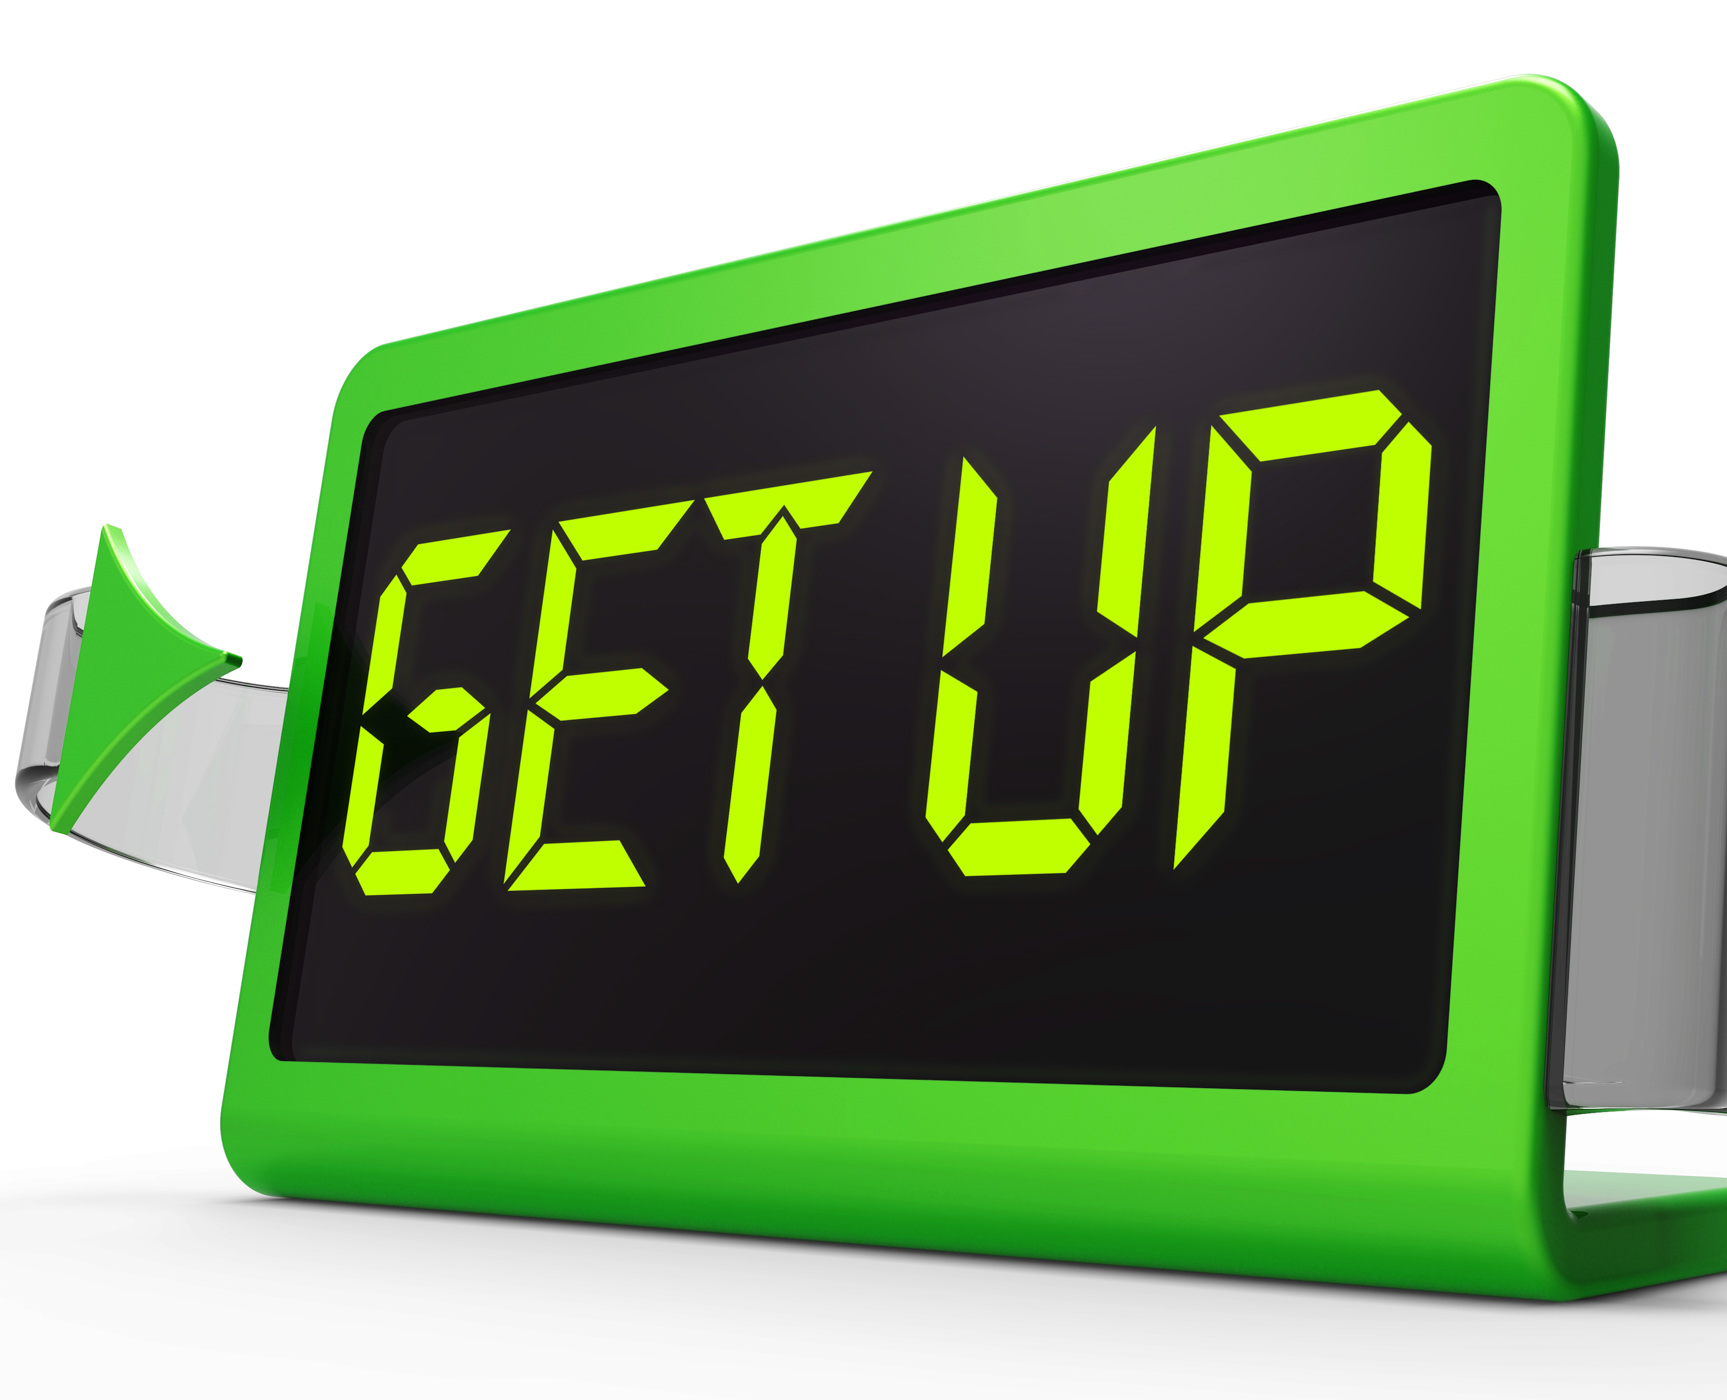 Get up clock message meaning wake up and rise photo